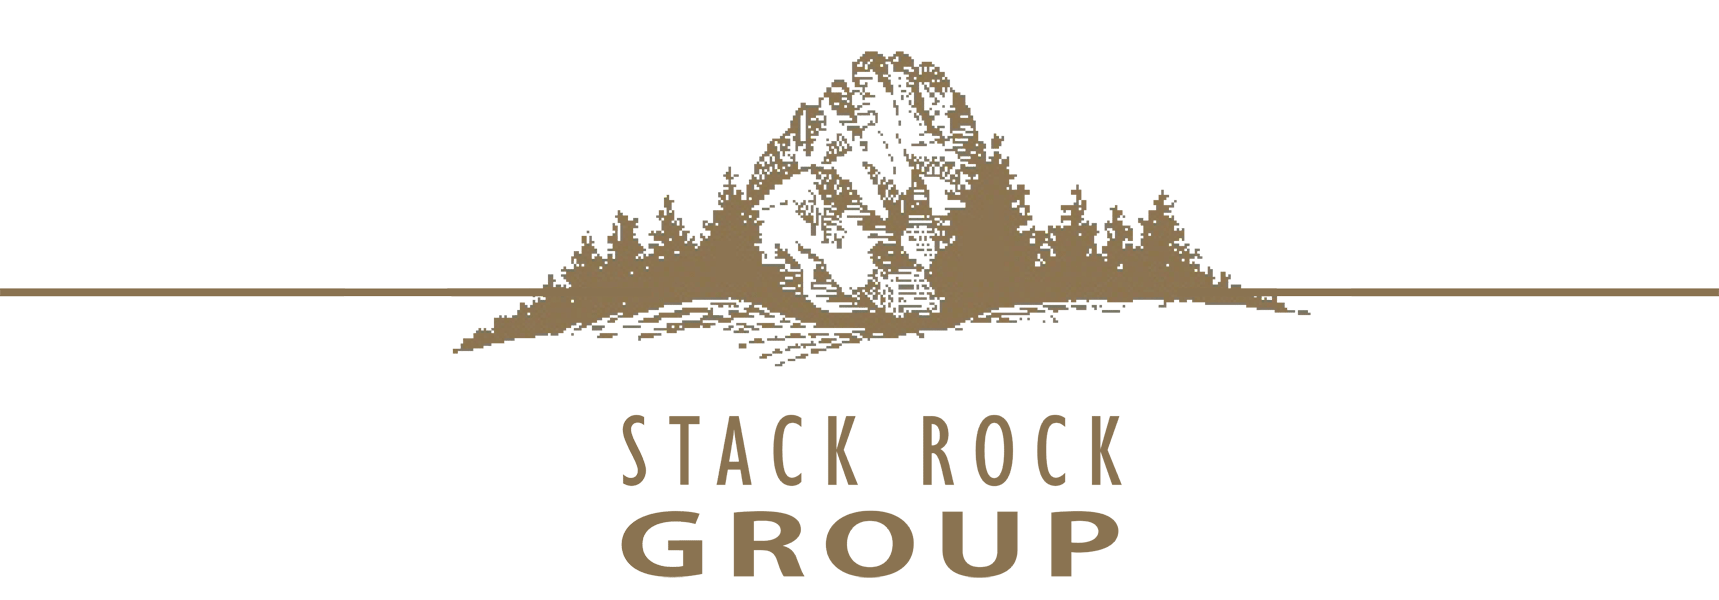 Rock Group Logo - Stack Rock Group Architecture and Planning